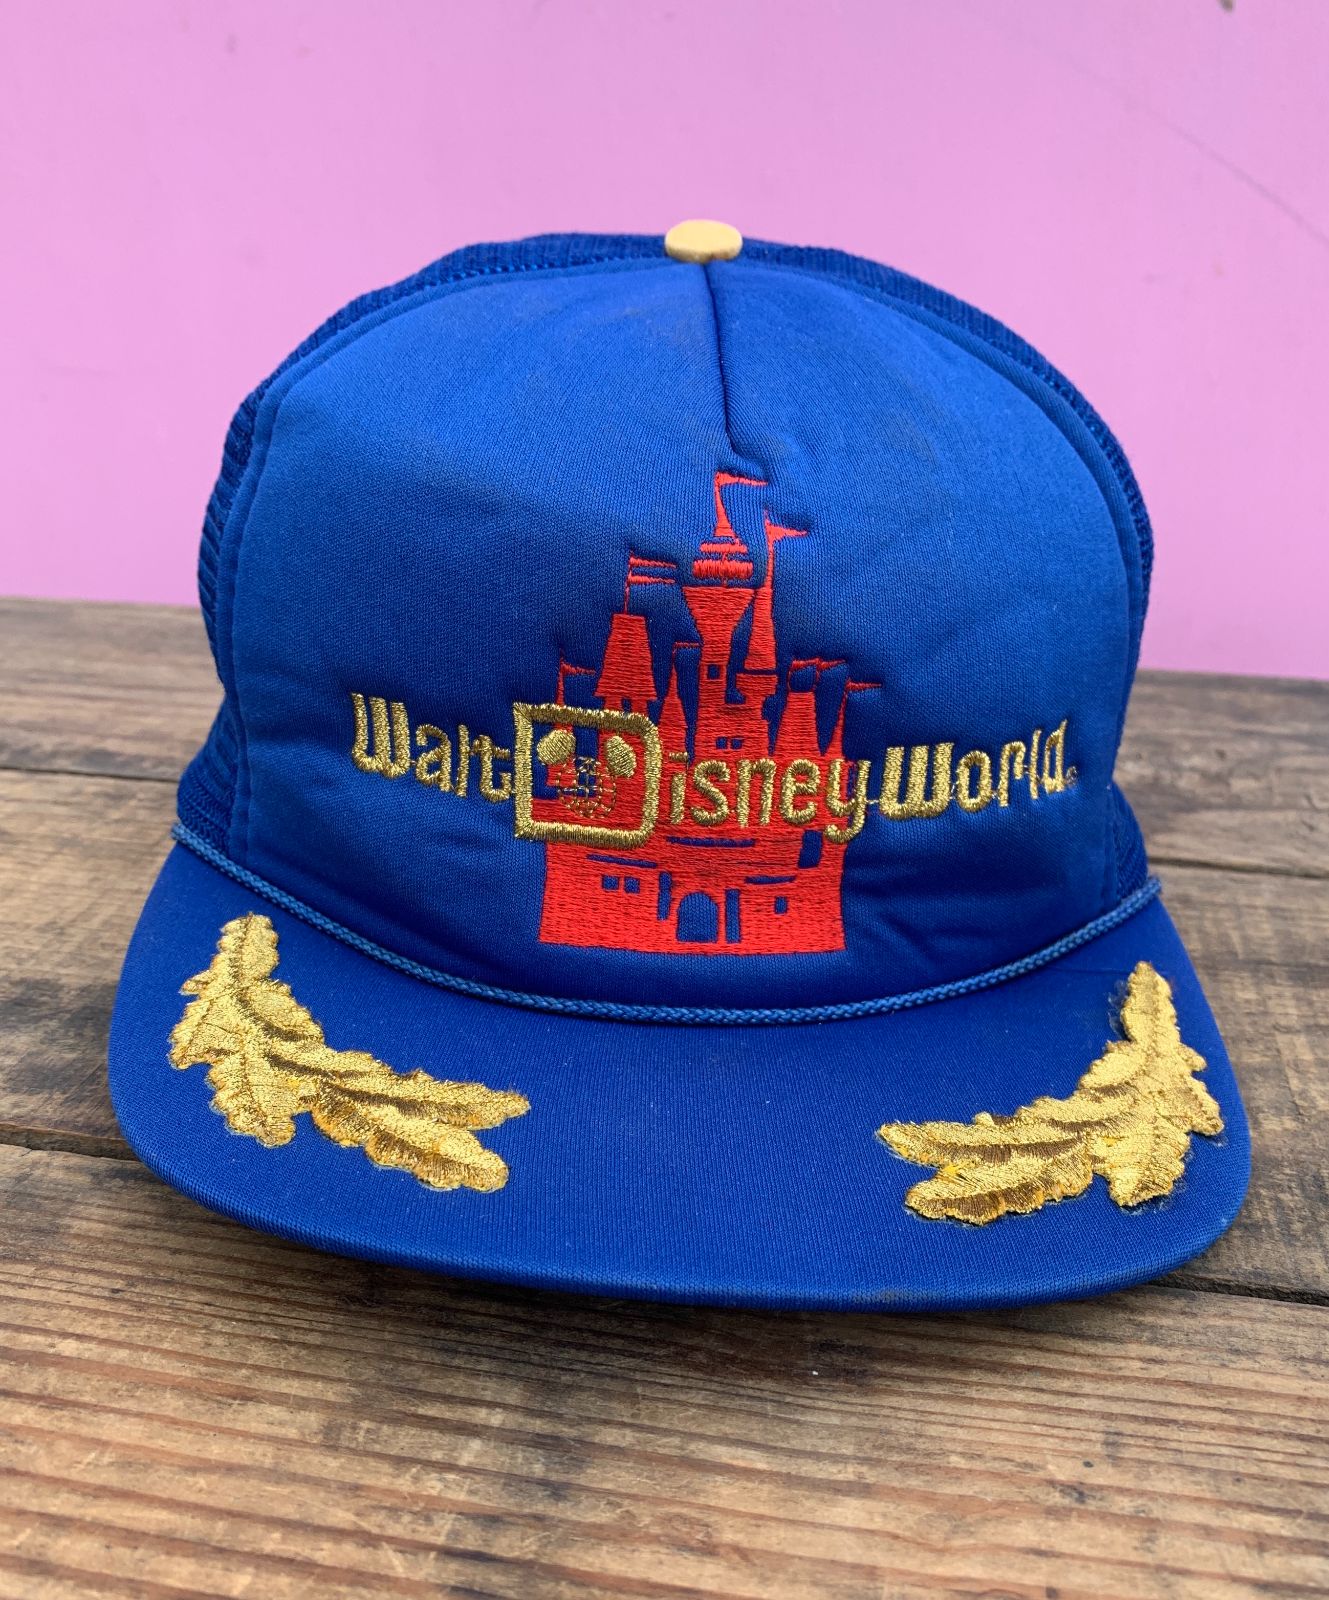 product details: AS-IS RETRO DISNEYLAND EMBROIDERED TRUCKER HAT W/ SCRAMBLED EGG EMBELESHMENT ON BRIM photo